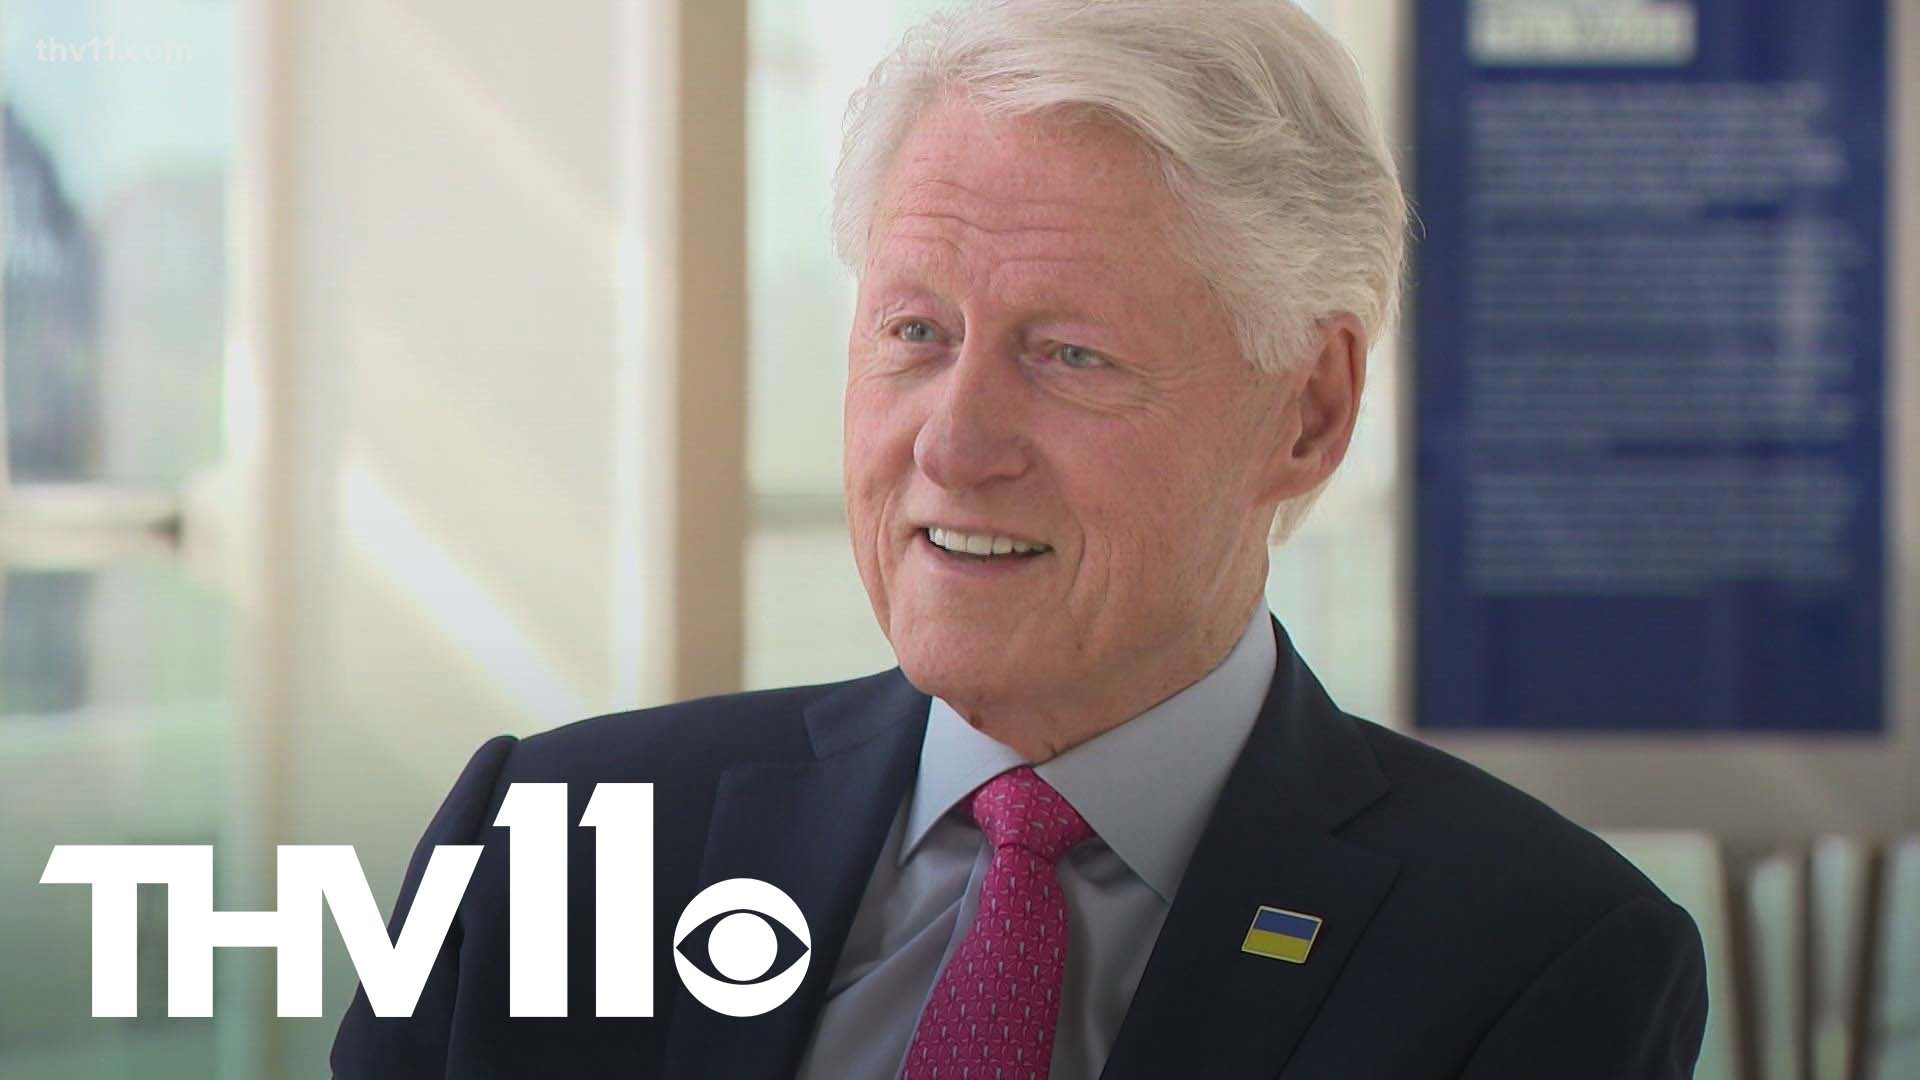 President Bill Clinton agreed to sit down with THV11's Craig O'Neill in the Clinton Center to chat about Arkansas politics, along with other topics.